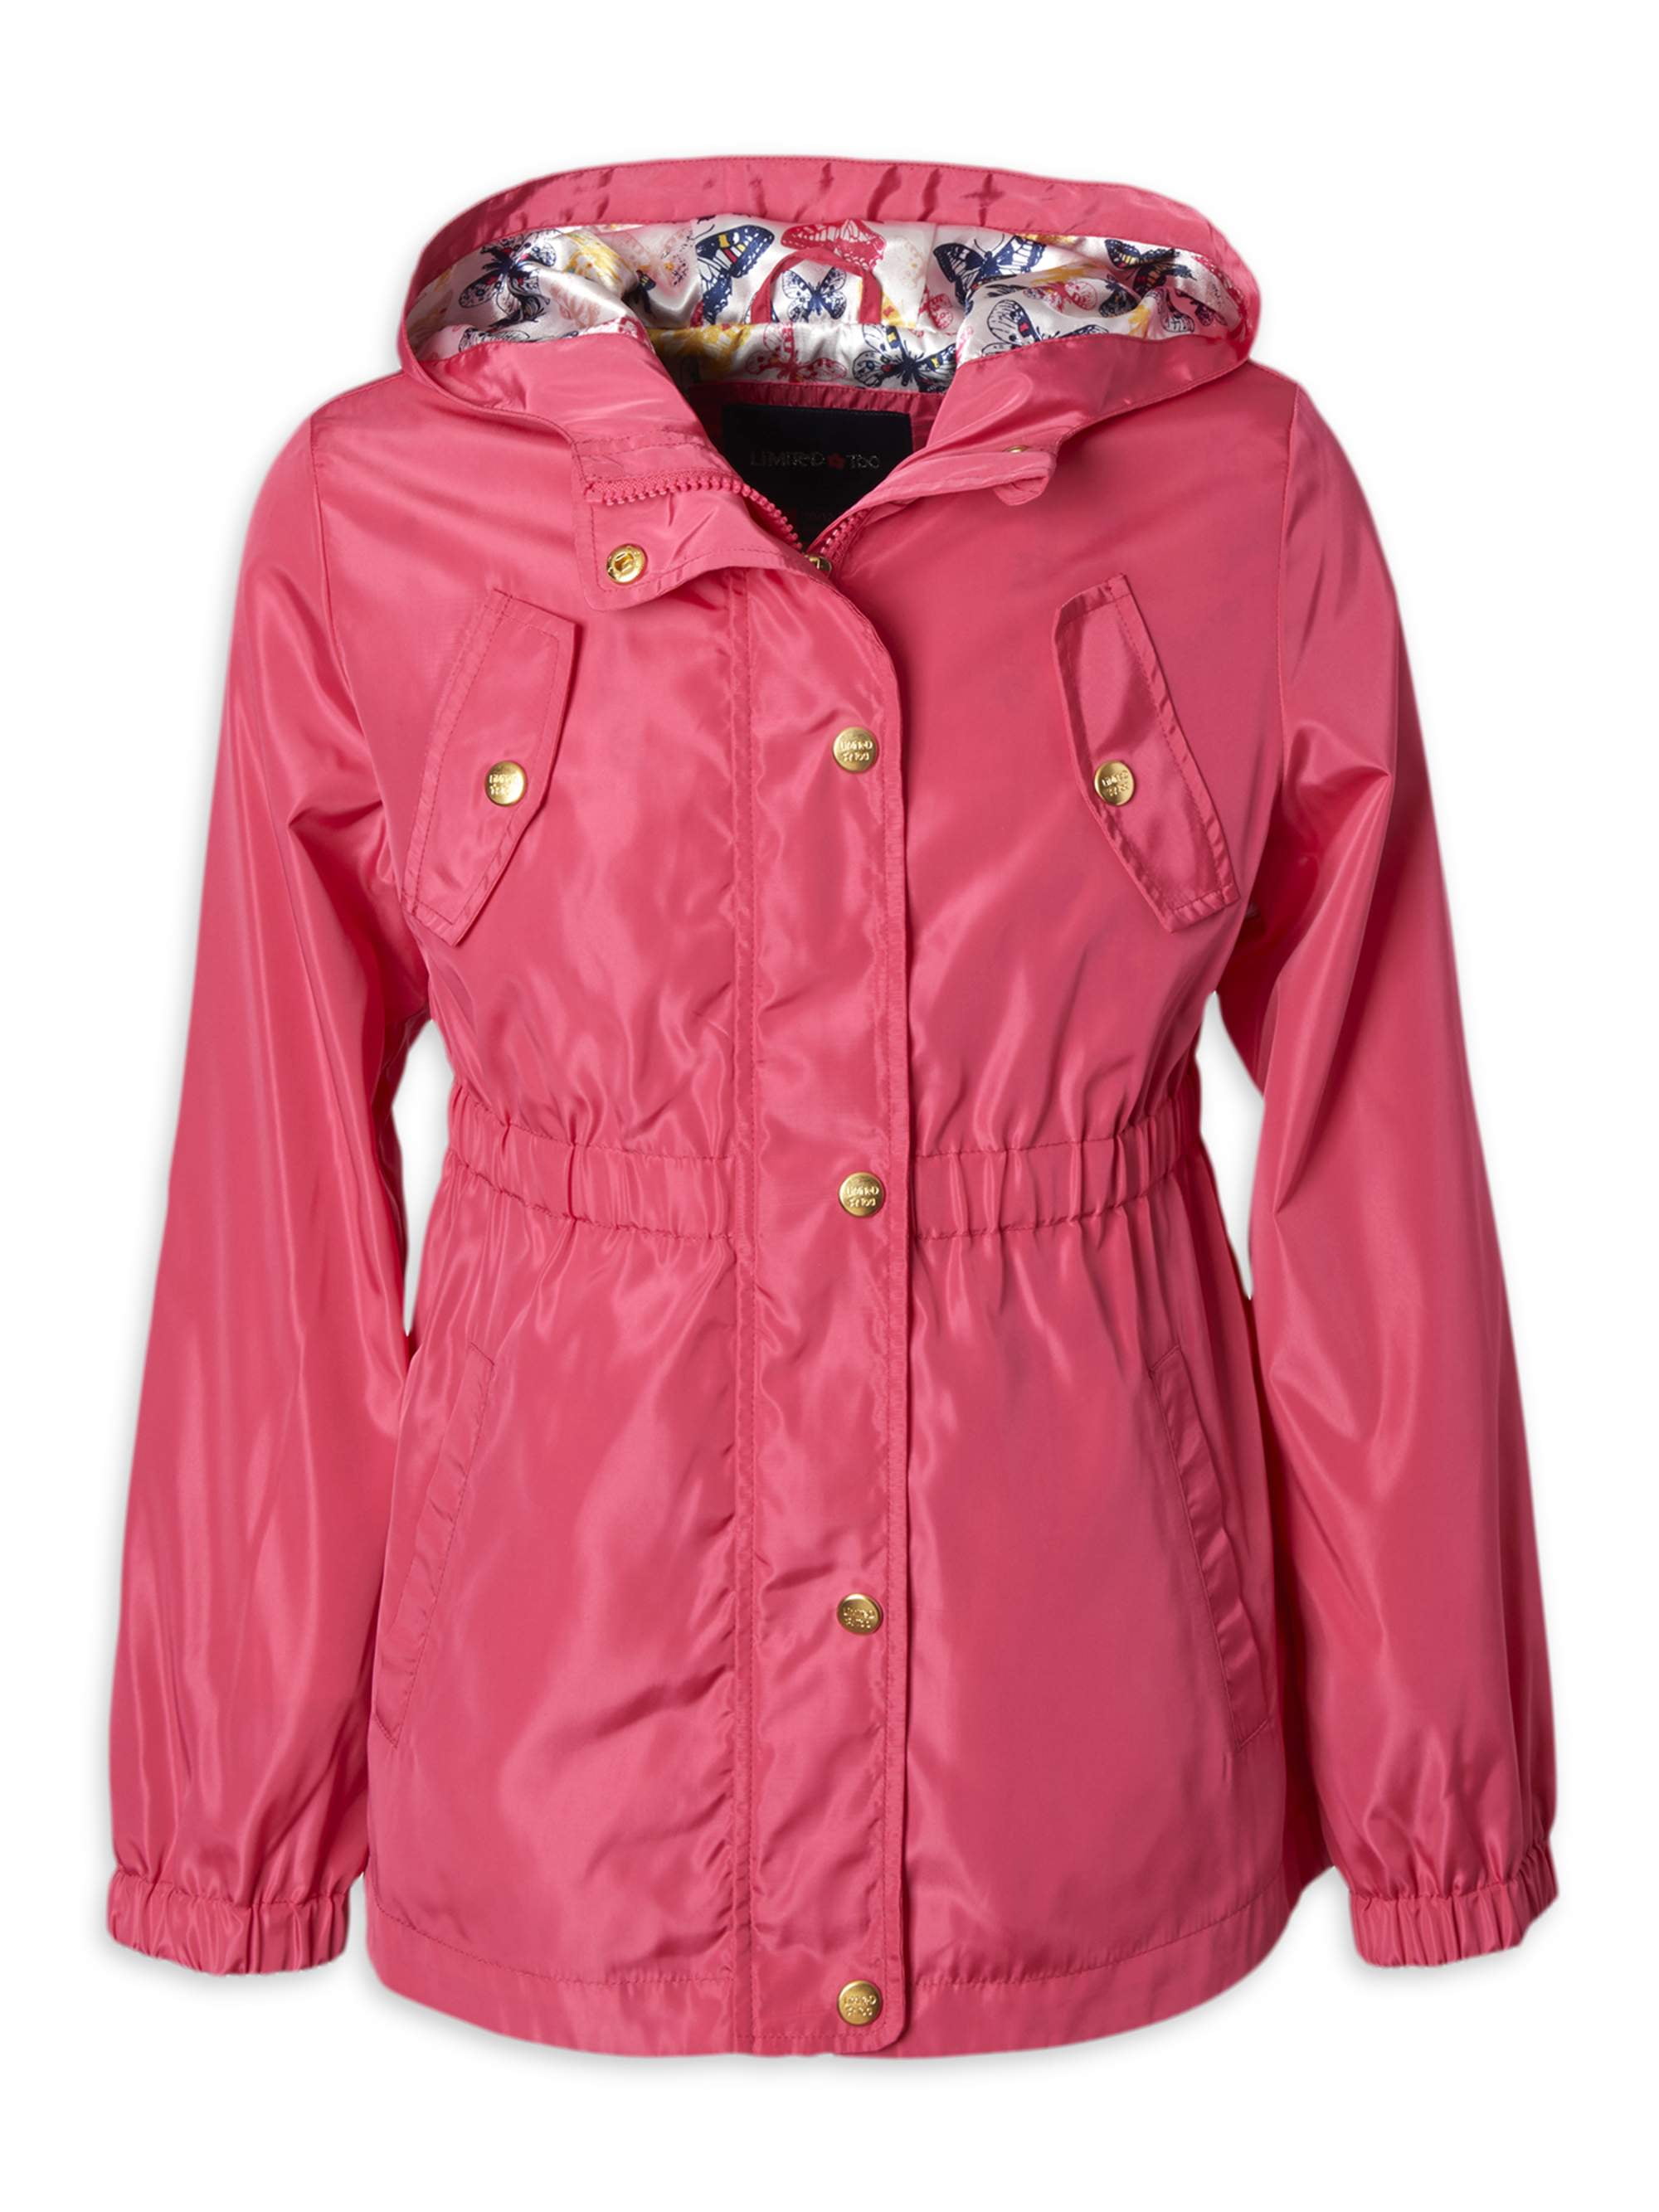 Limited Too Girls Jacket Lightweight Waterproof Anorak Raincoat with Hood and Cotton Lining